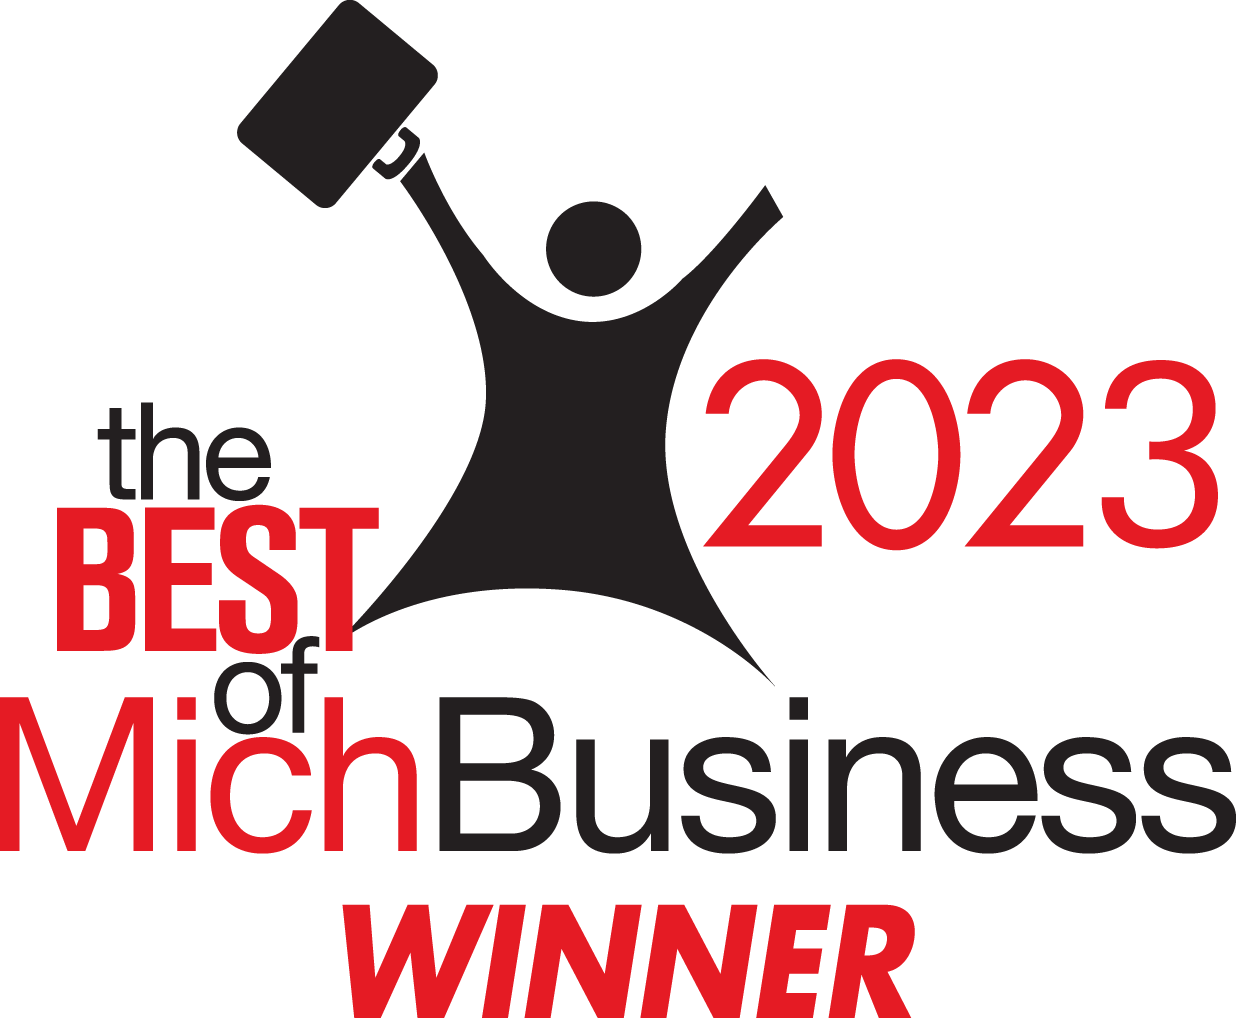 CCI Industrial Constructors - Triumphant achievement - celebrating the winner of the best of michbusiness 2023 award.